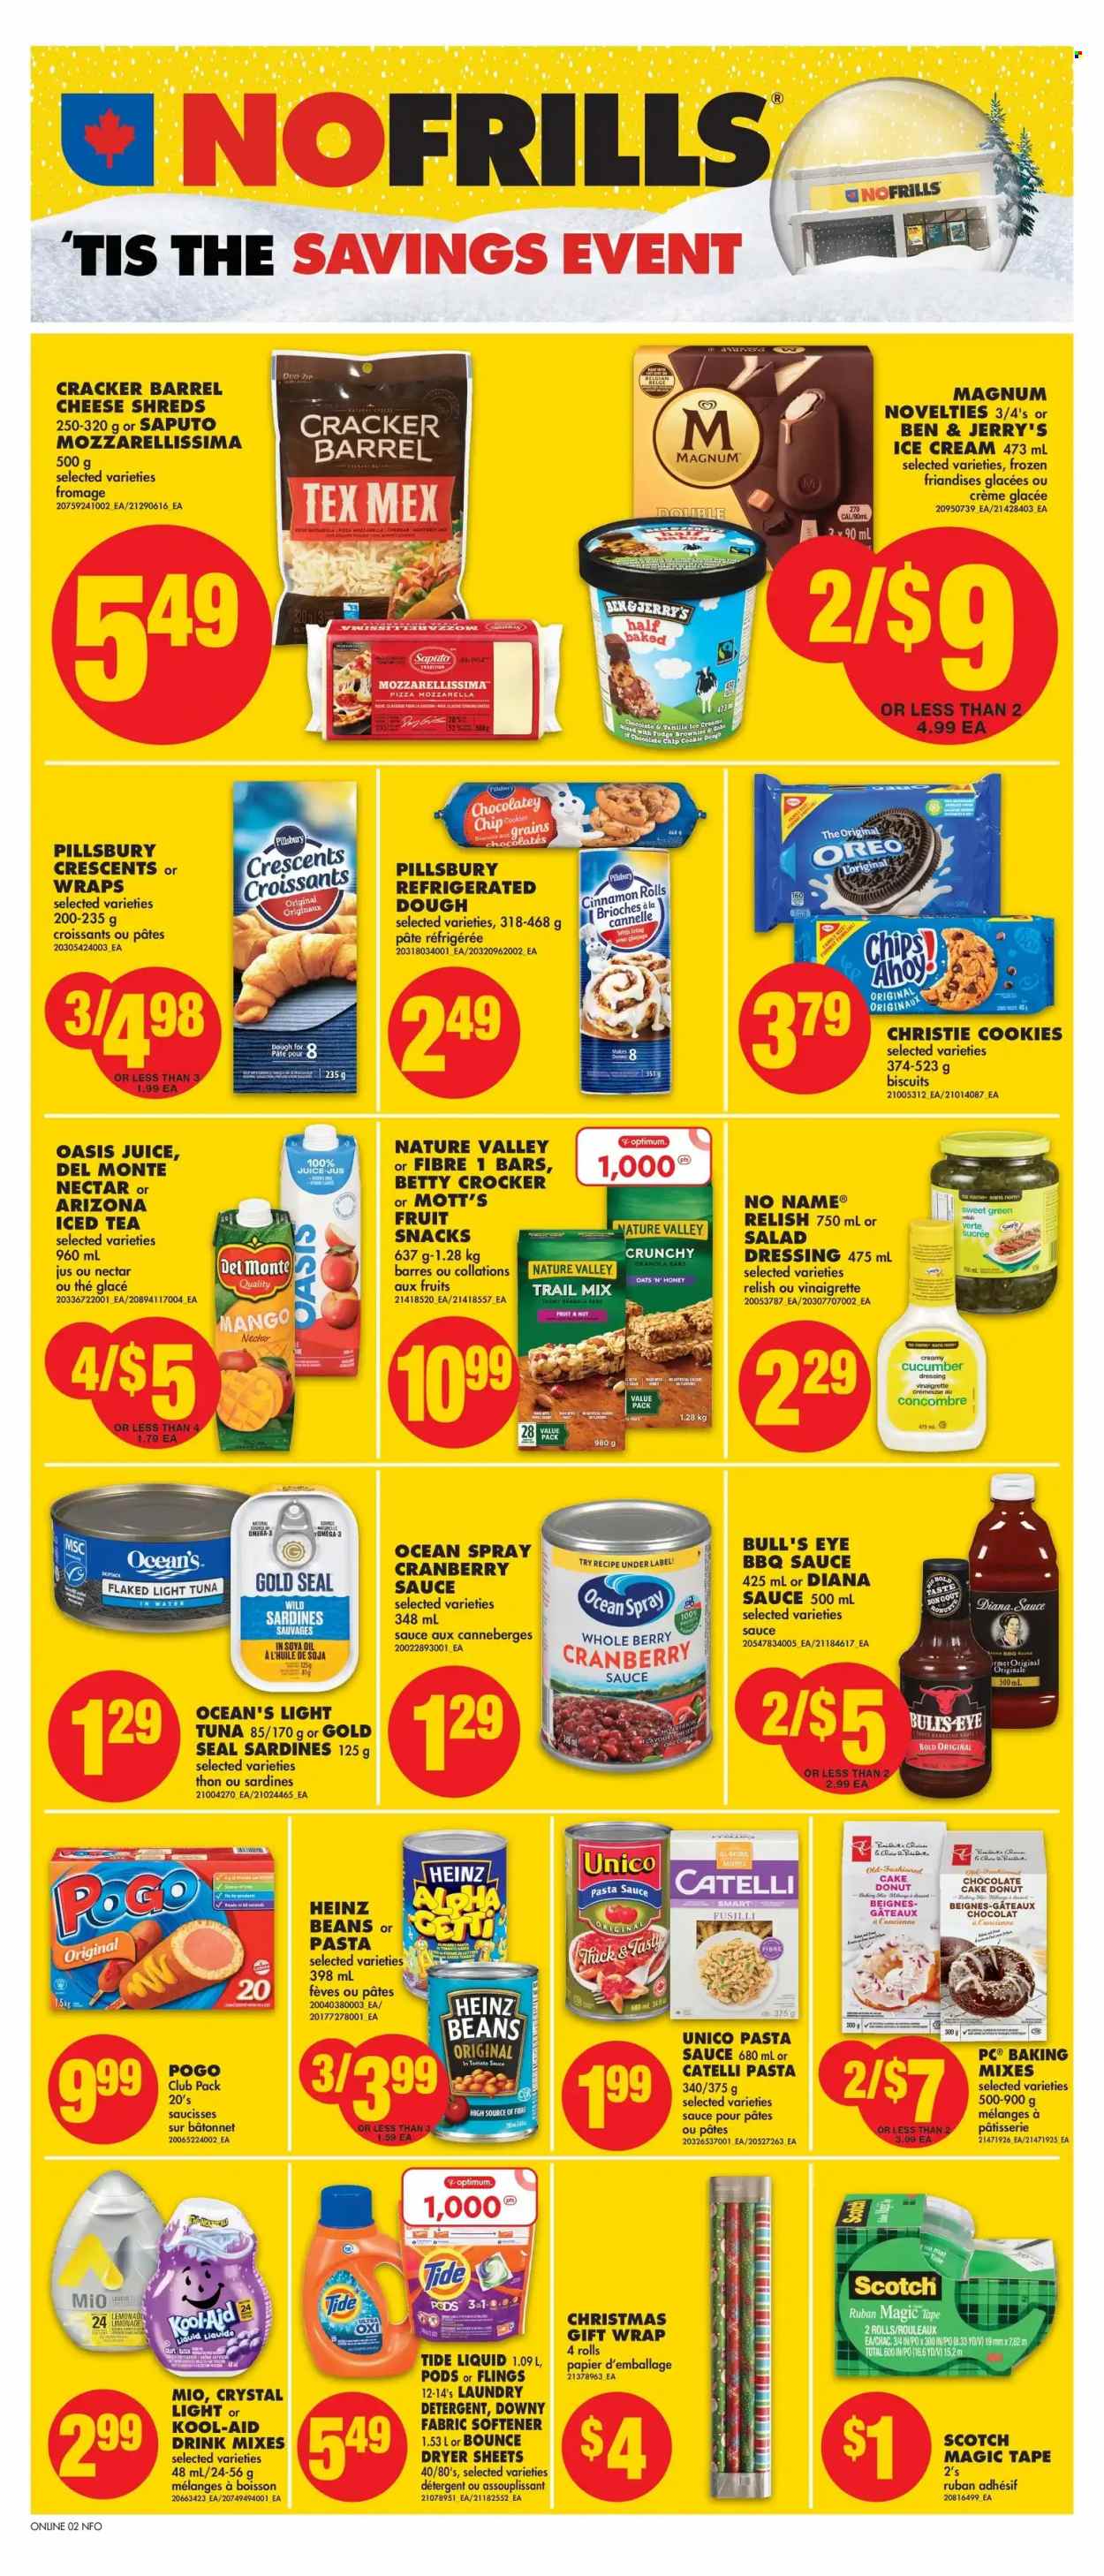 thumbnail - No Frills Flyer - November 24, 2022 - November 30, 2022 - Sales products - chair, cake, croissant, wraps, cinnamon roll, donut, chocolate cake, beans, mango, Mott's, cod, sardines, tuna, No Name, pizza, pasta sauce, Pillsbury, Président, ice cream, Ben & Jerry's, cookies, fudge, crackers, biscuit, fruit snack, oats, baking mix, tuna in water, light tuna, Del Monte, granola bar, Nature Valley, rice, BBQ sauce, salad dressing, vinaigrette dressing, dressing, cranberry sauce, honey, trail mix, juice, ice tea, AriZona, Tide, fabric softener, laundry detergent, Bounce, dryer sheets, Downy Laundry, Axe, gift wrap, Optimum, detergent, Heinz, Oreo. Page 7.